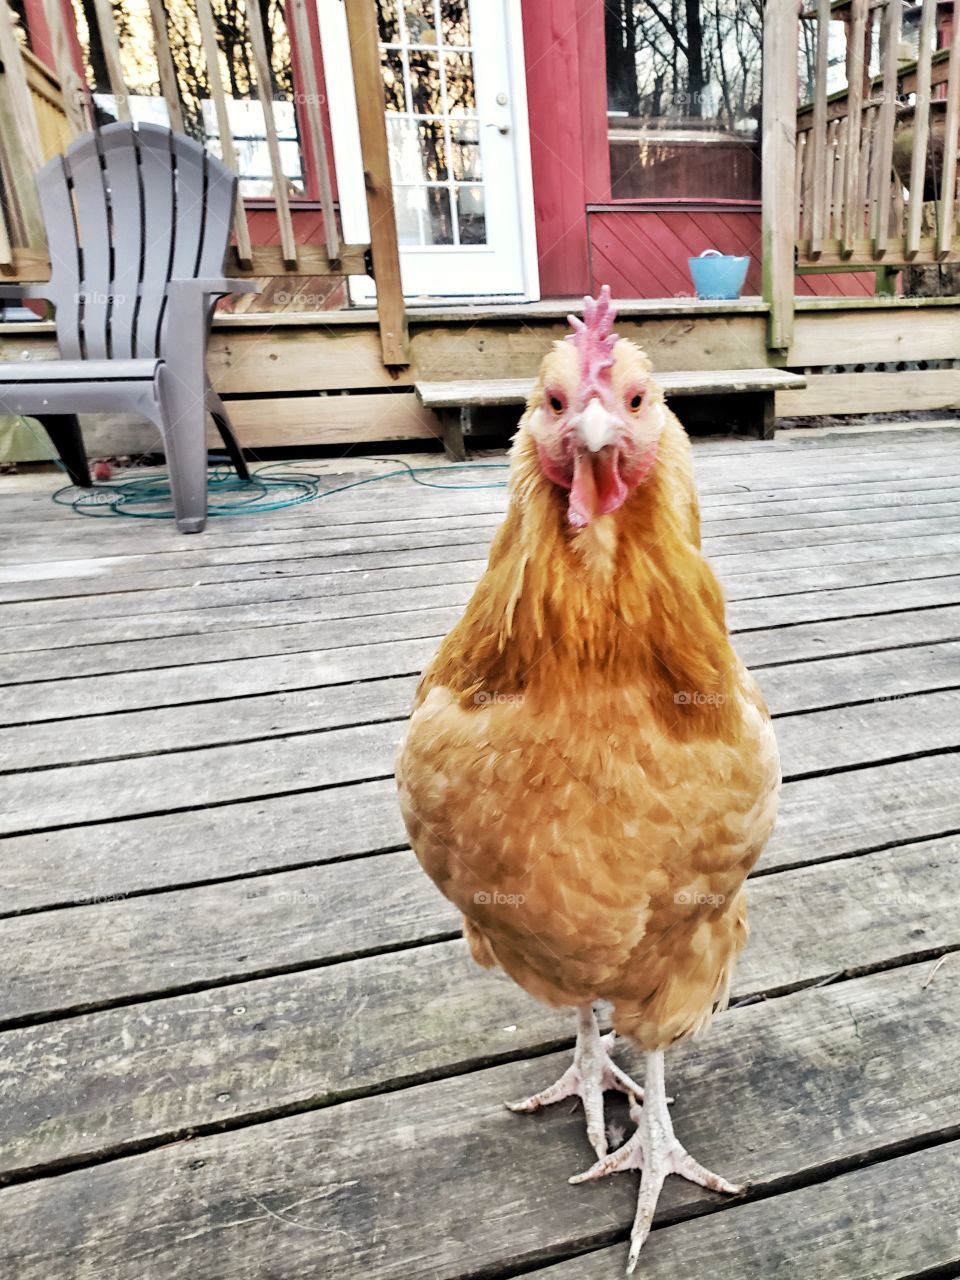 A pet chicken leisurely walks across an outdoor wooden deck with the family house in the background